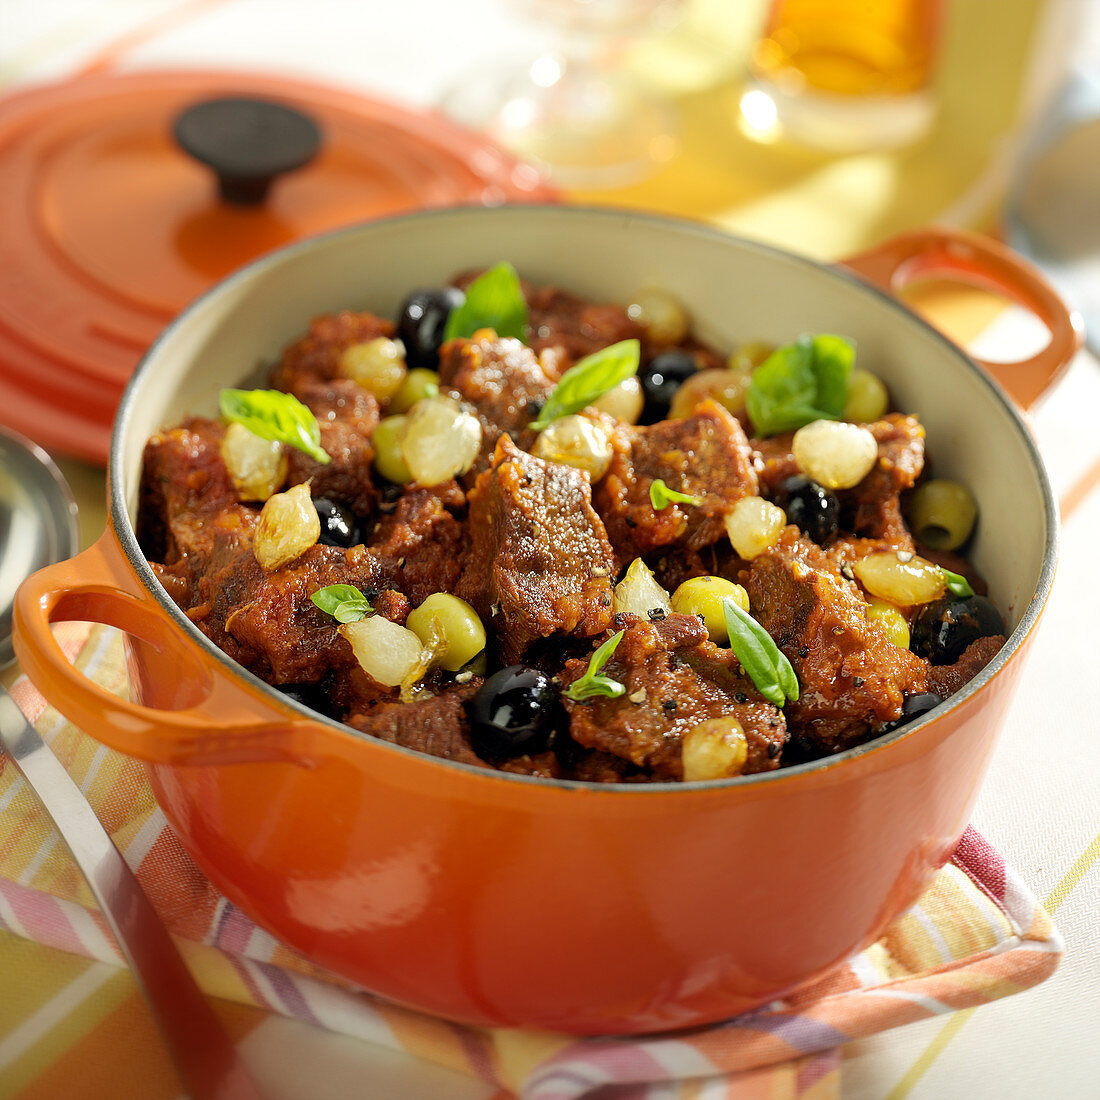 Beef and black olive casserole stew